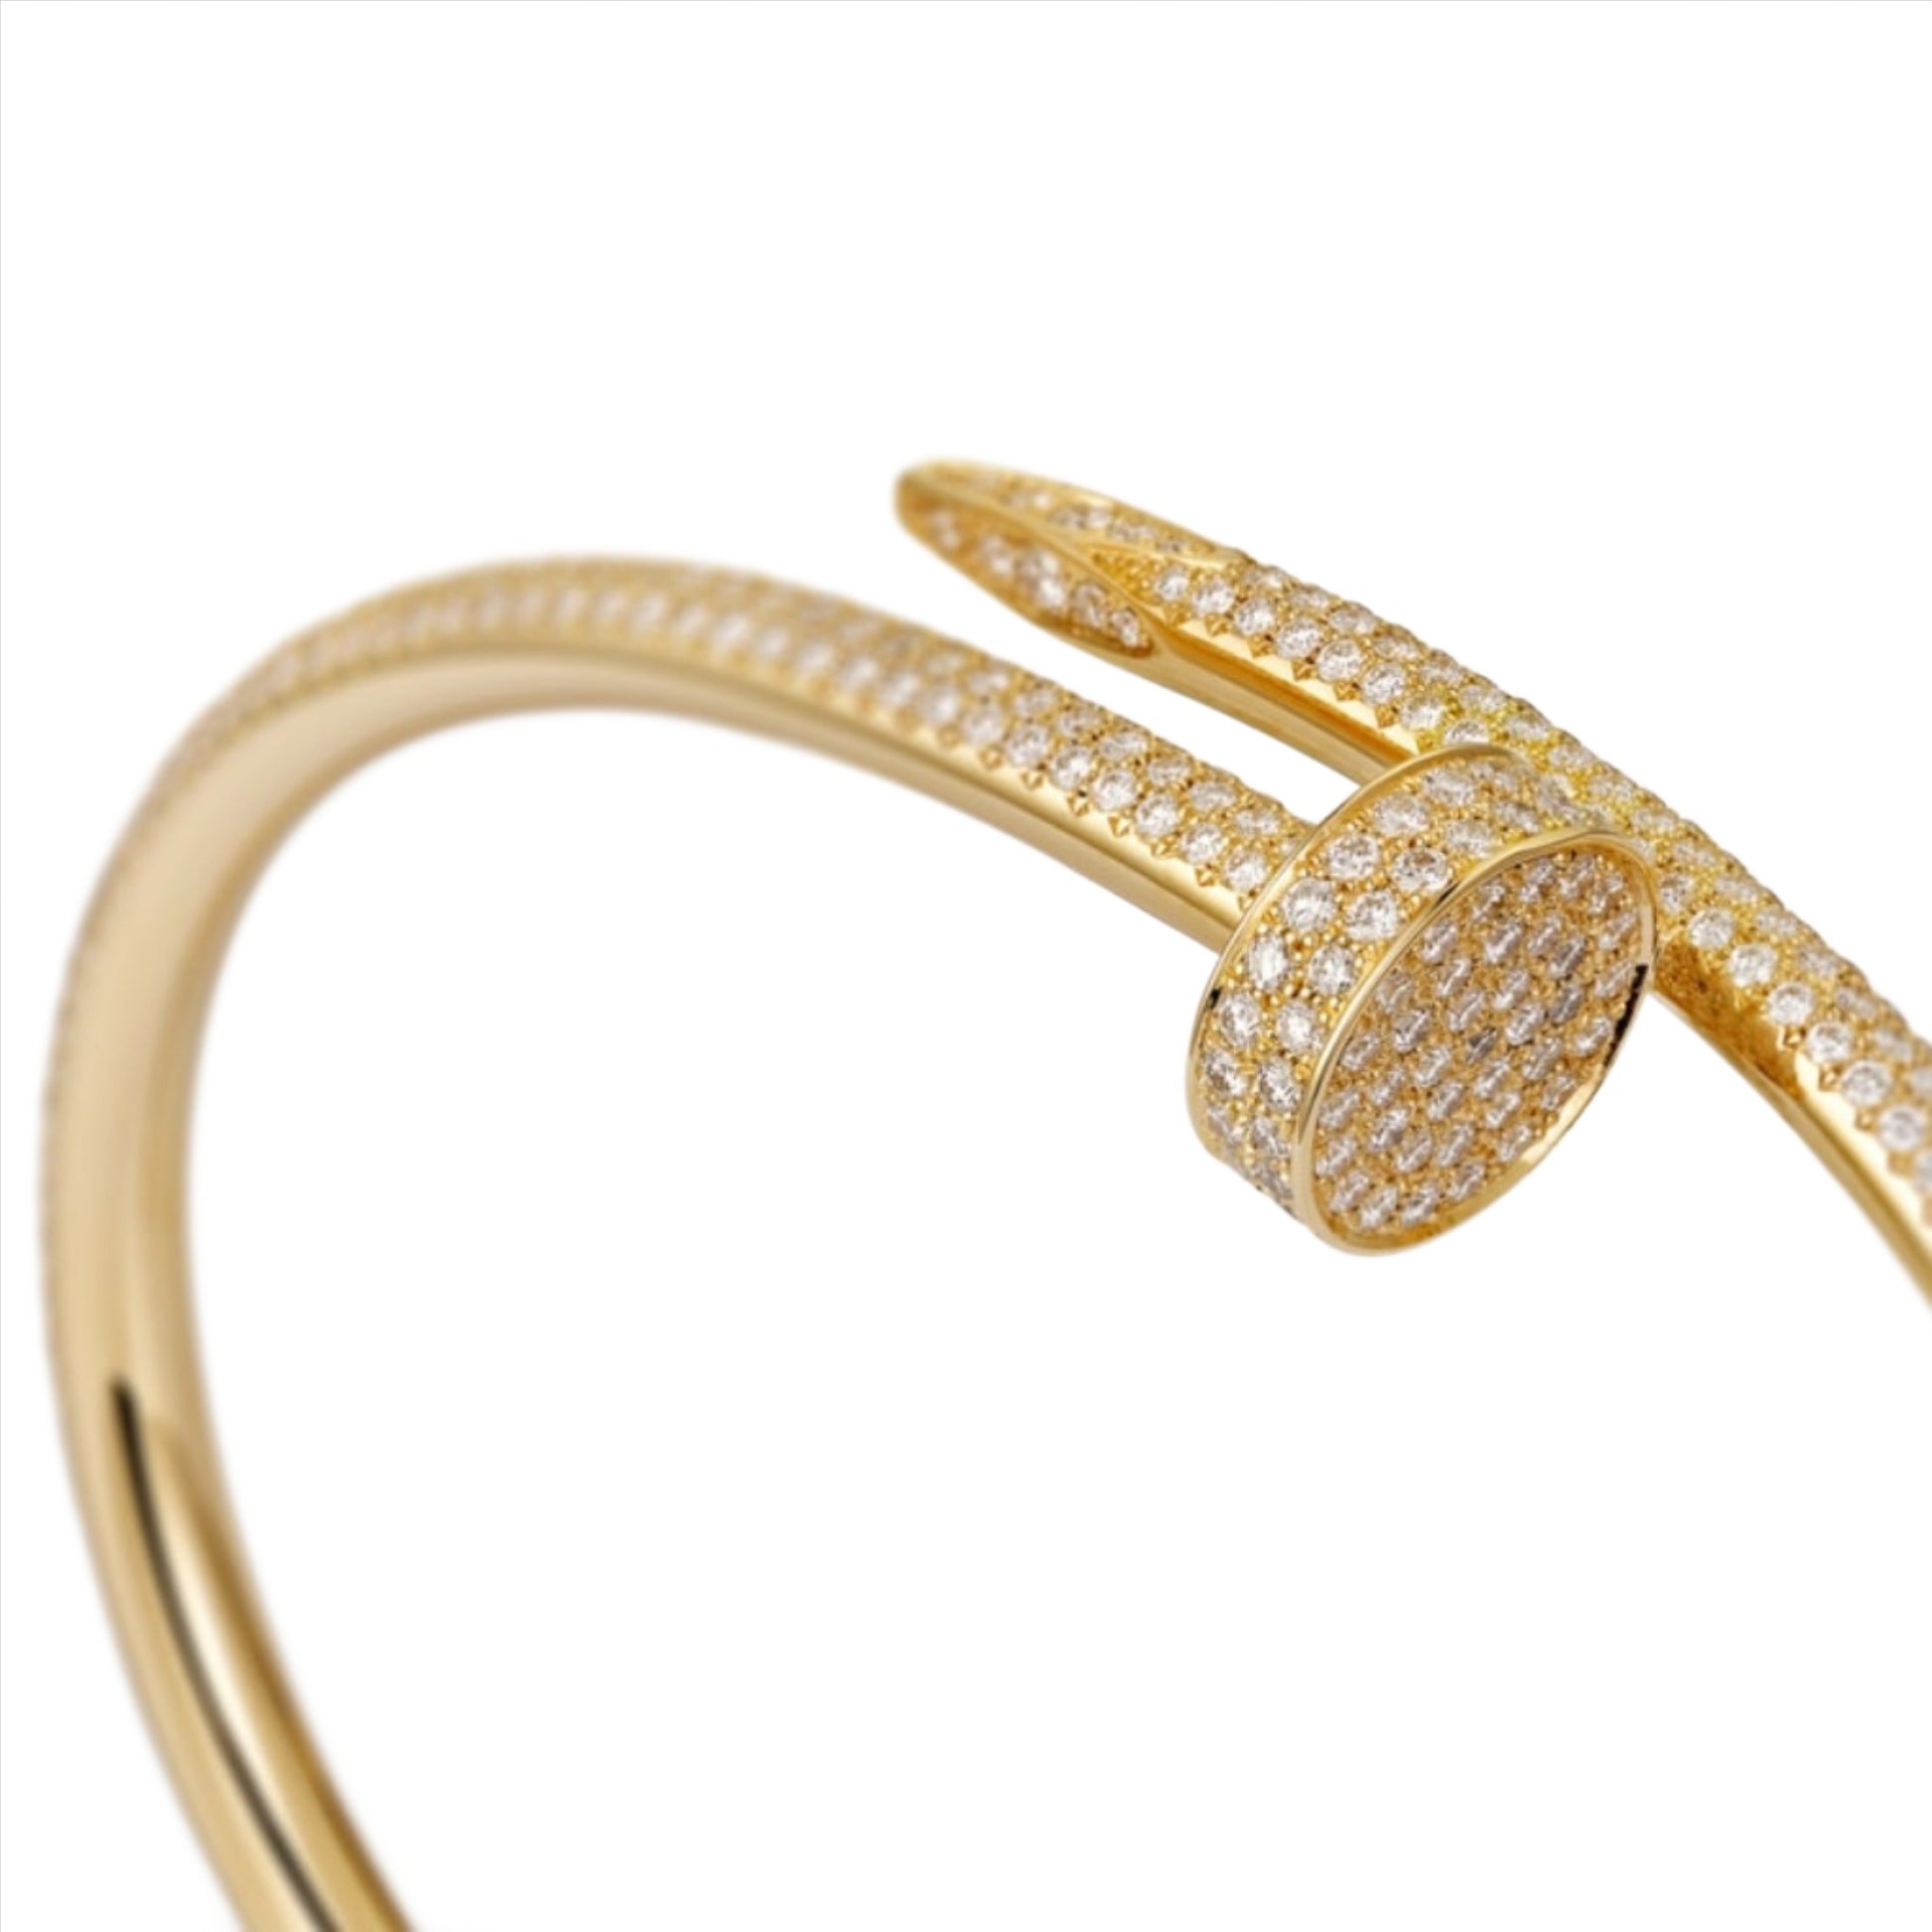 Gold with diamond paved bracelet for women